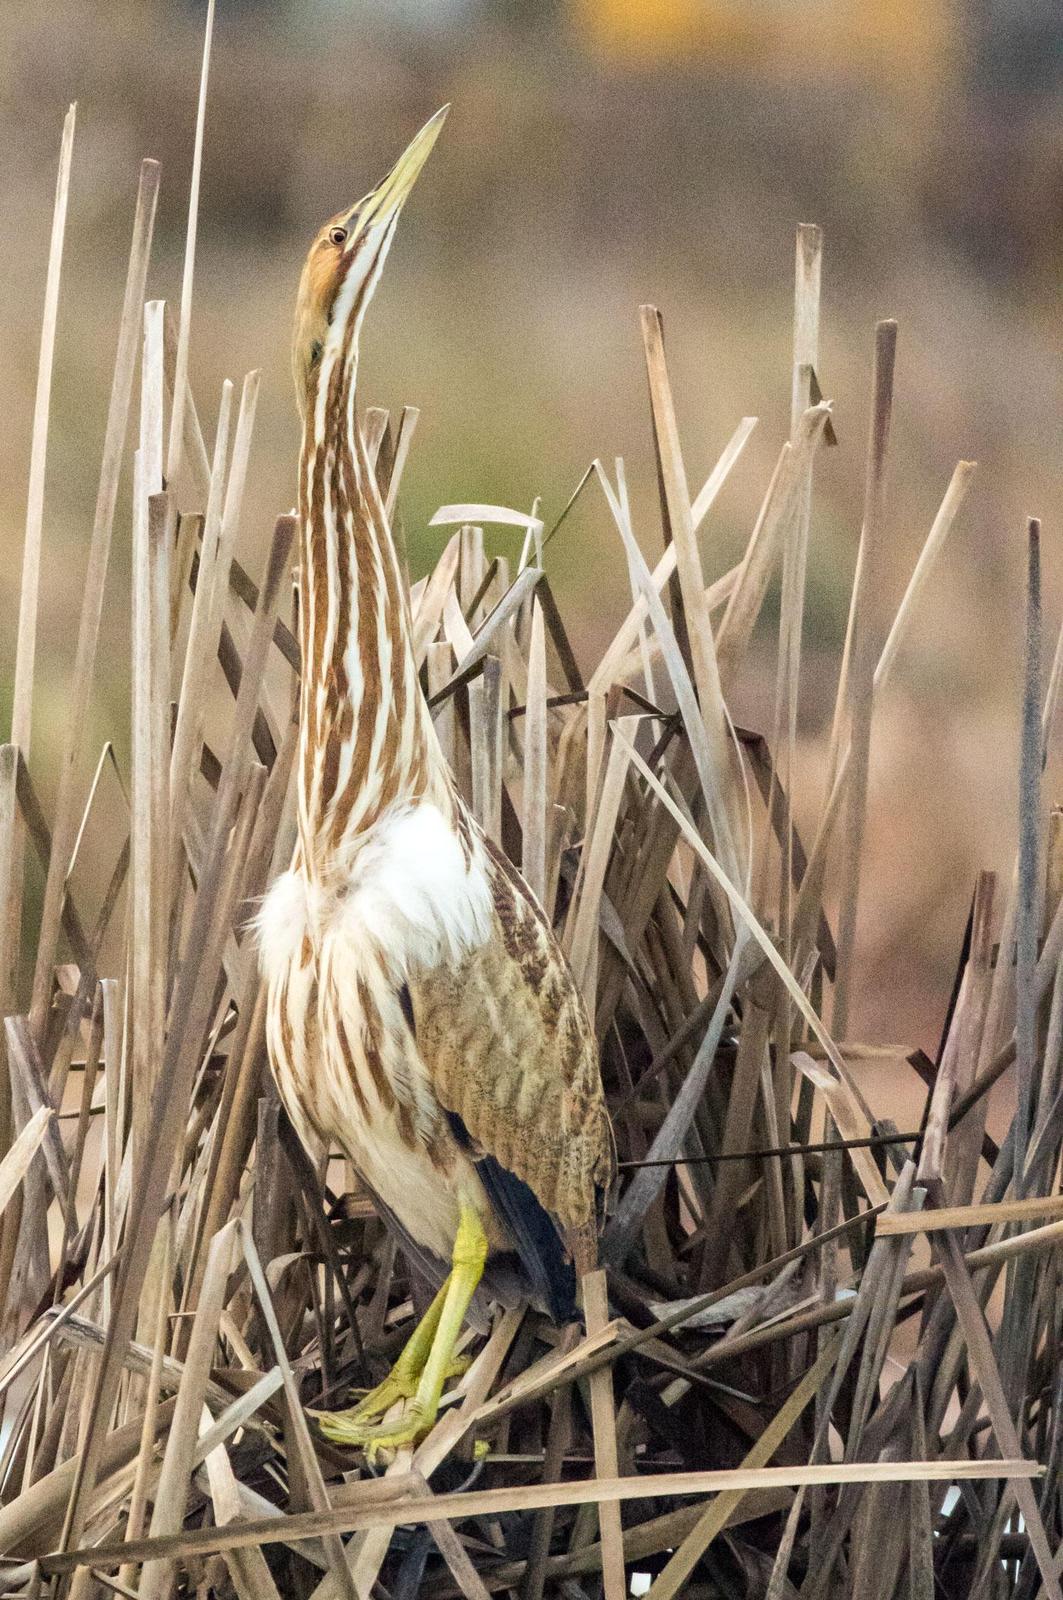 American Bittern Photo by Phil Kahler